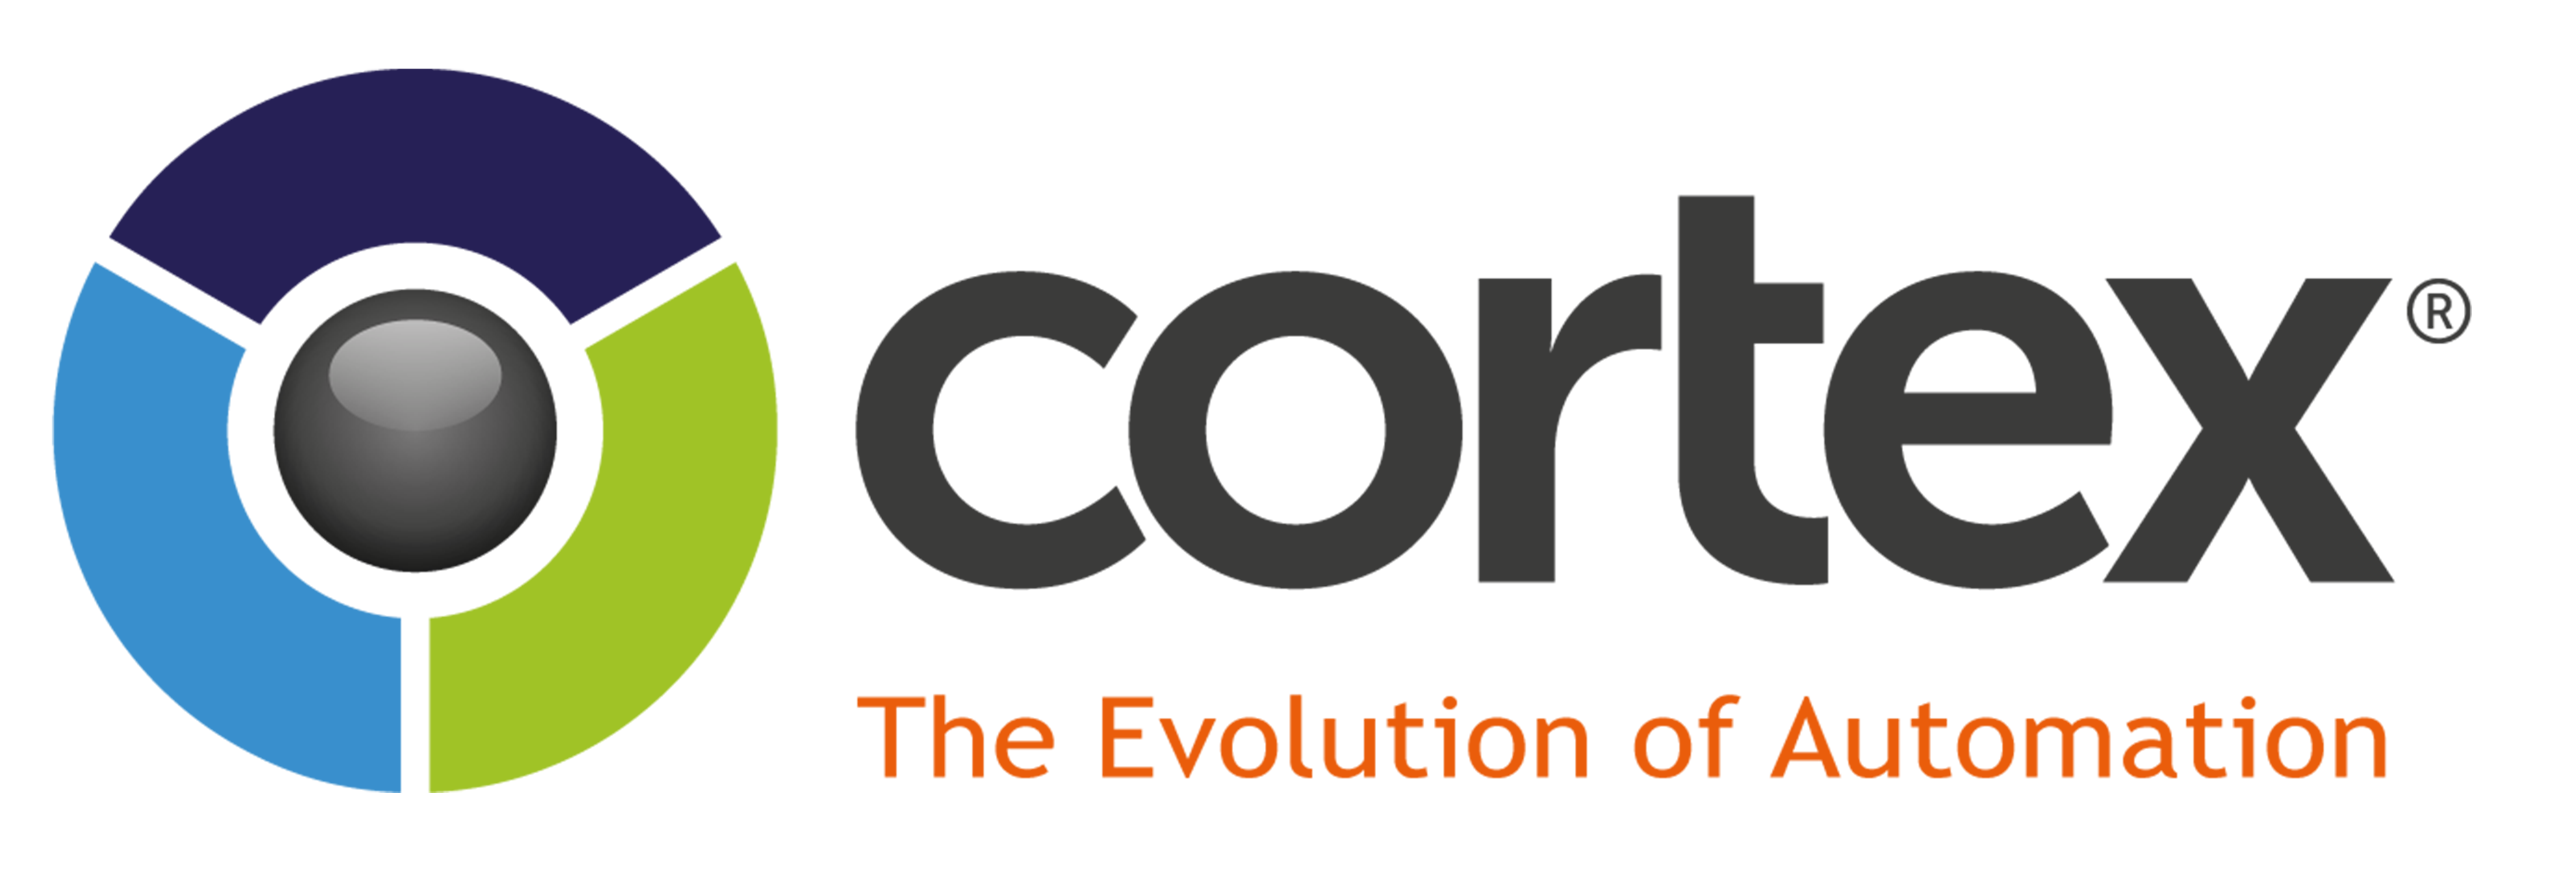 CORTEX - Harness the business-boosting power of the latest digital innovations in insurance